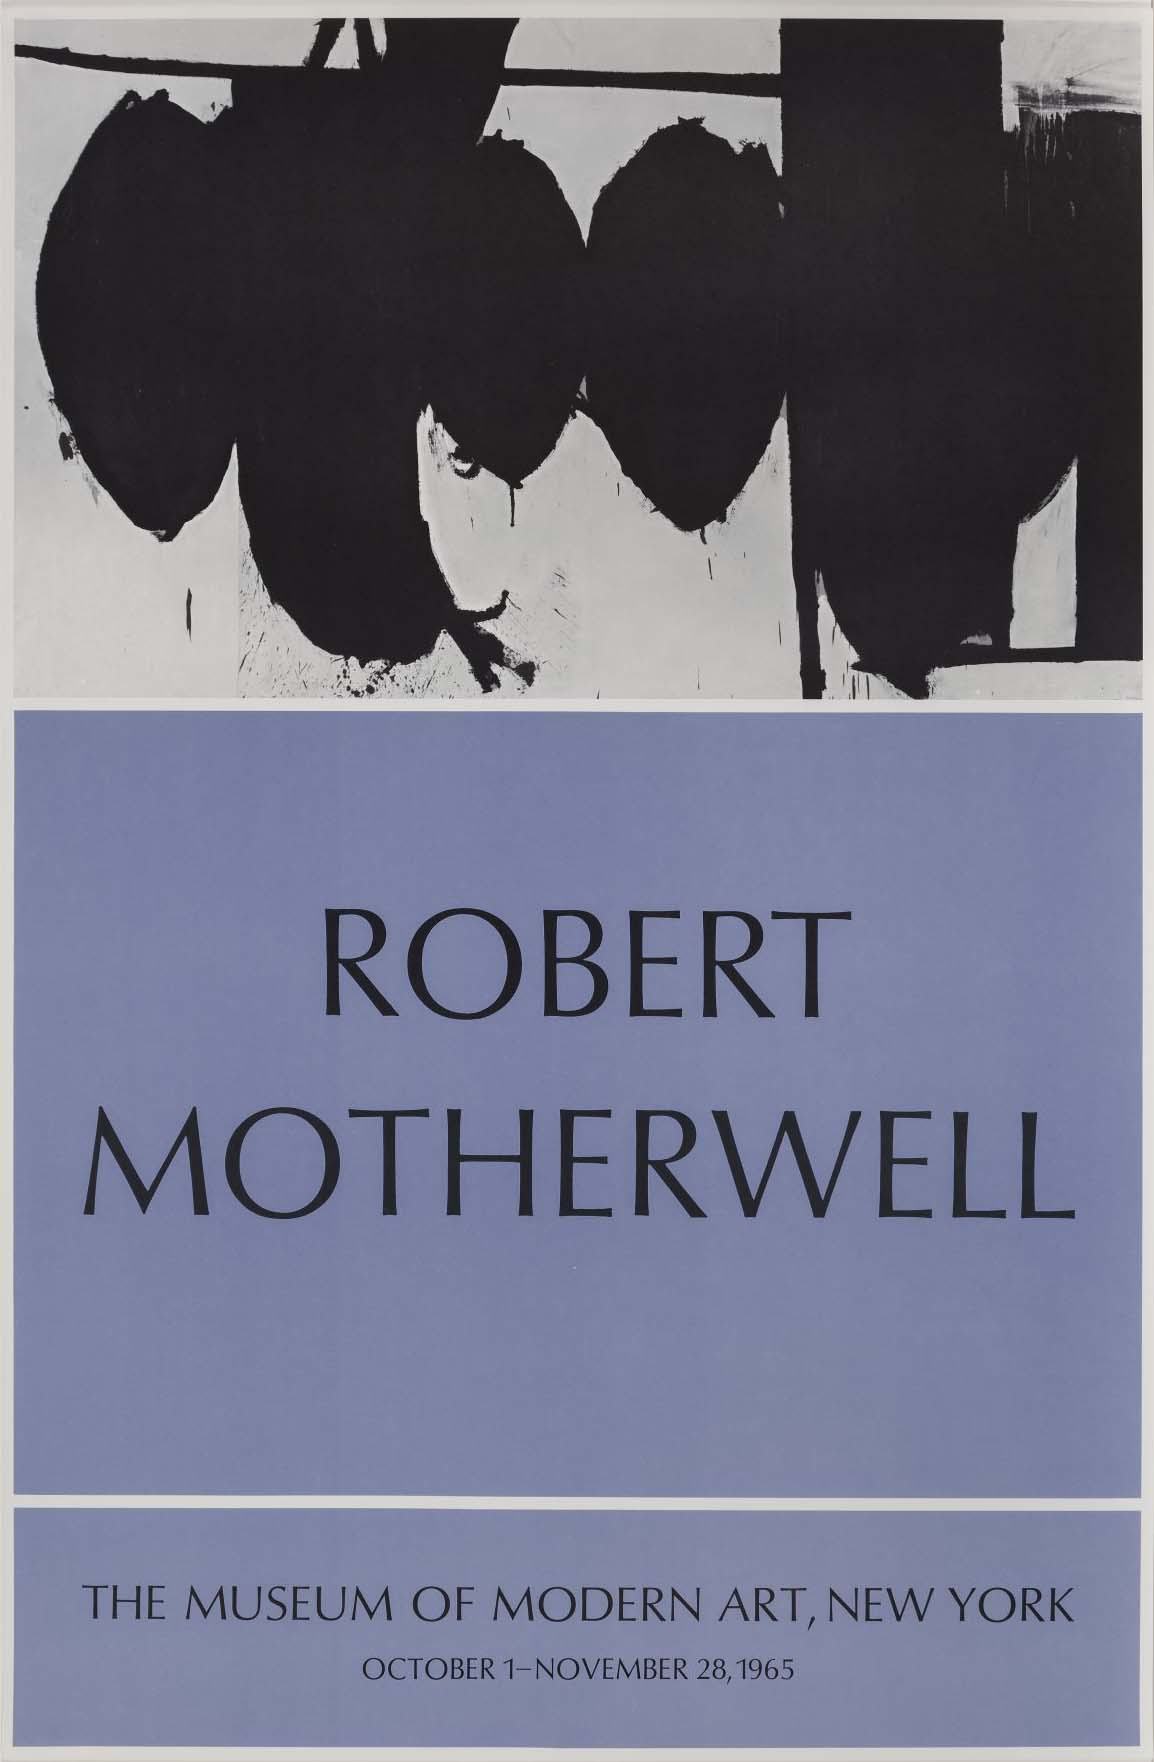 Poster from Robert Motherwell at the Museum of Modern Art, New York, 1965